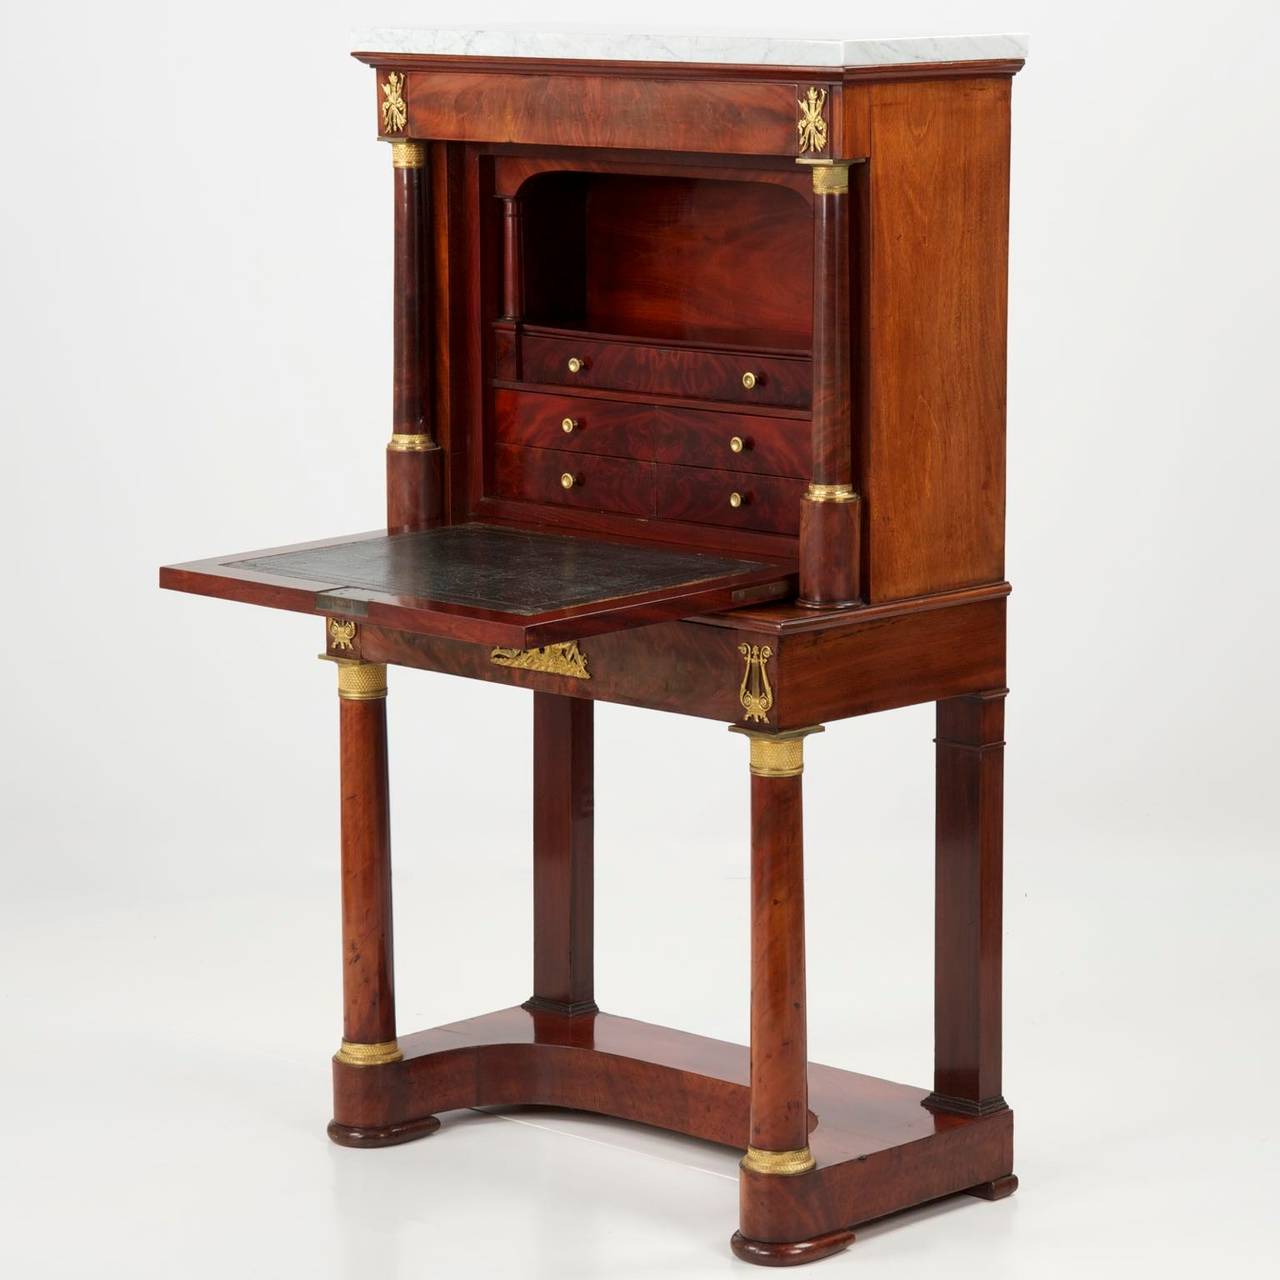 A positively exceptional work from the first quarter of the 19th Century, this fine Secrétaire à Abattant exhibits the best of the period.  The carefully selected and matched flamed mahogany veneers have mellowed to a warm cognac hue throughout, the